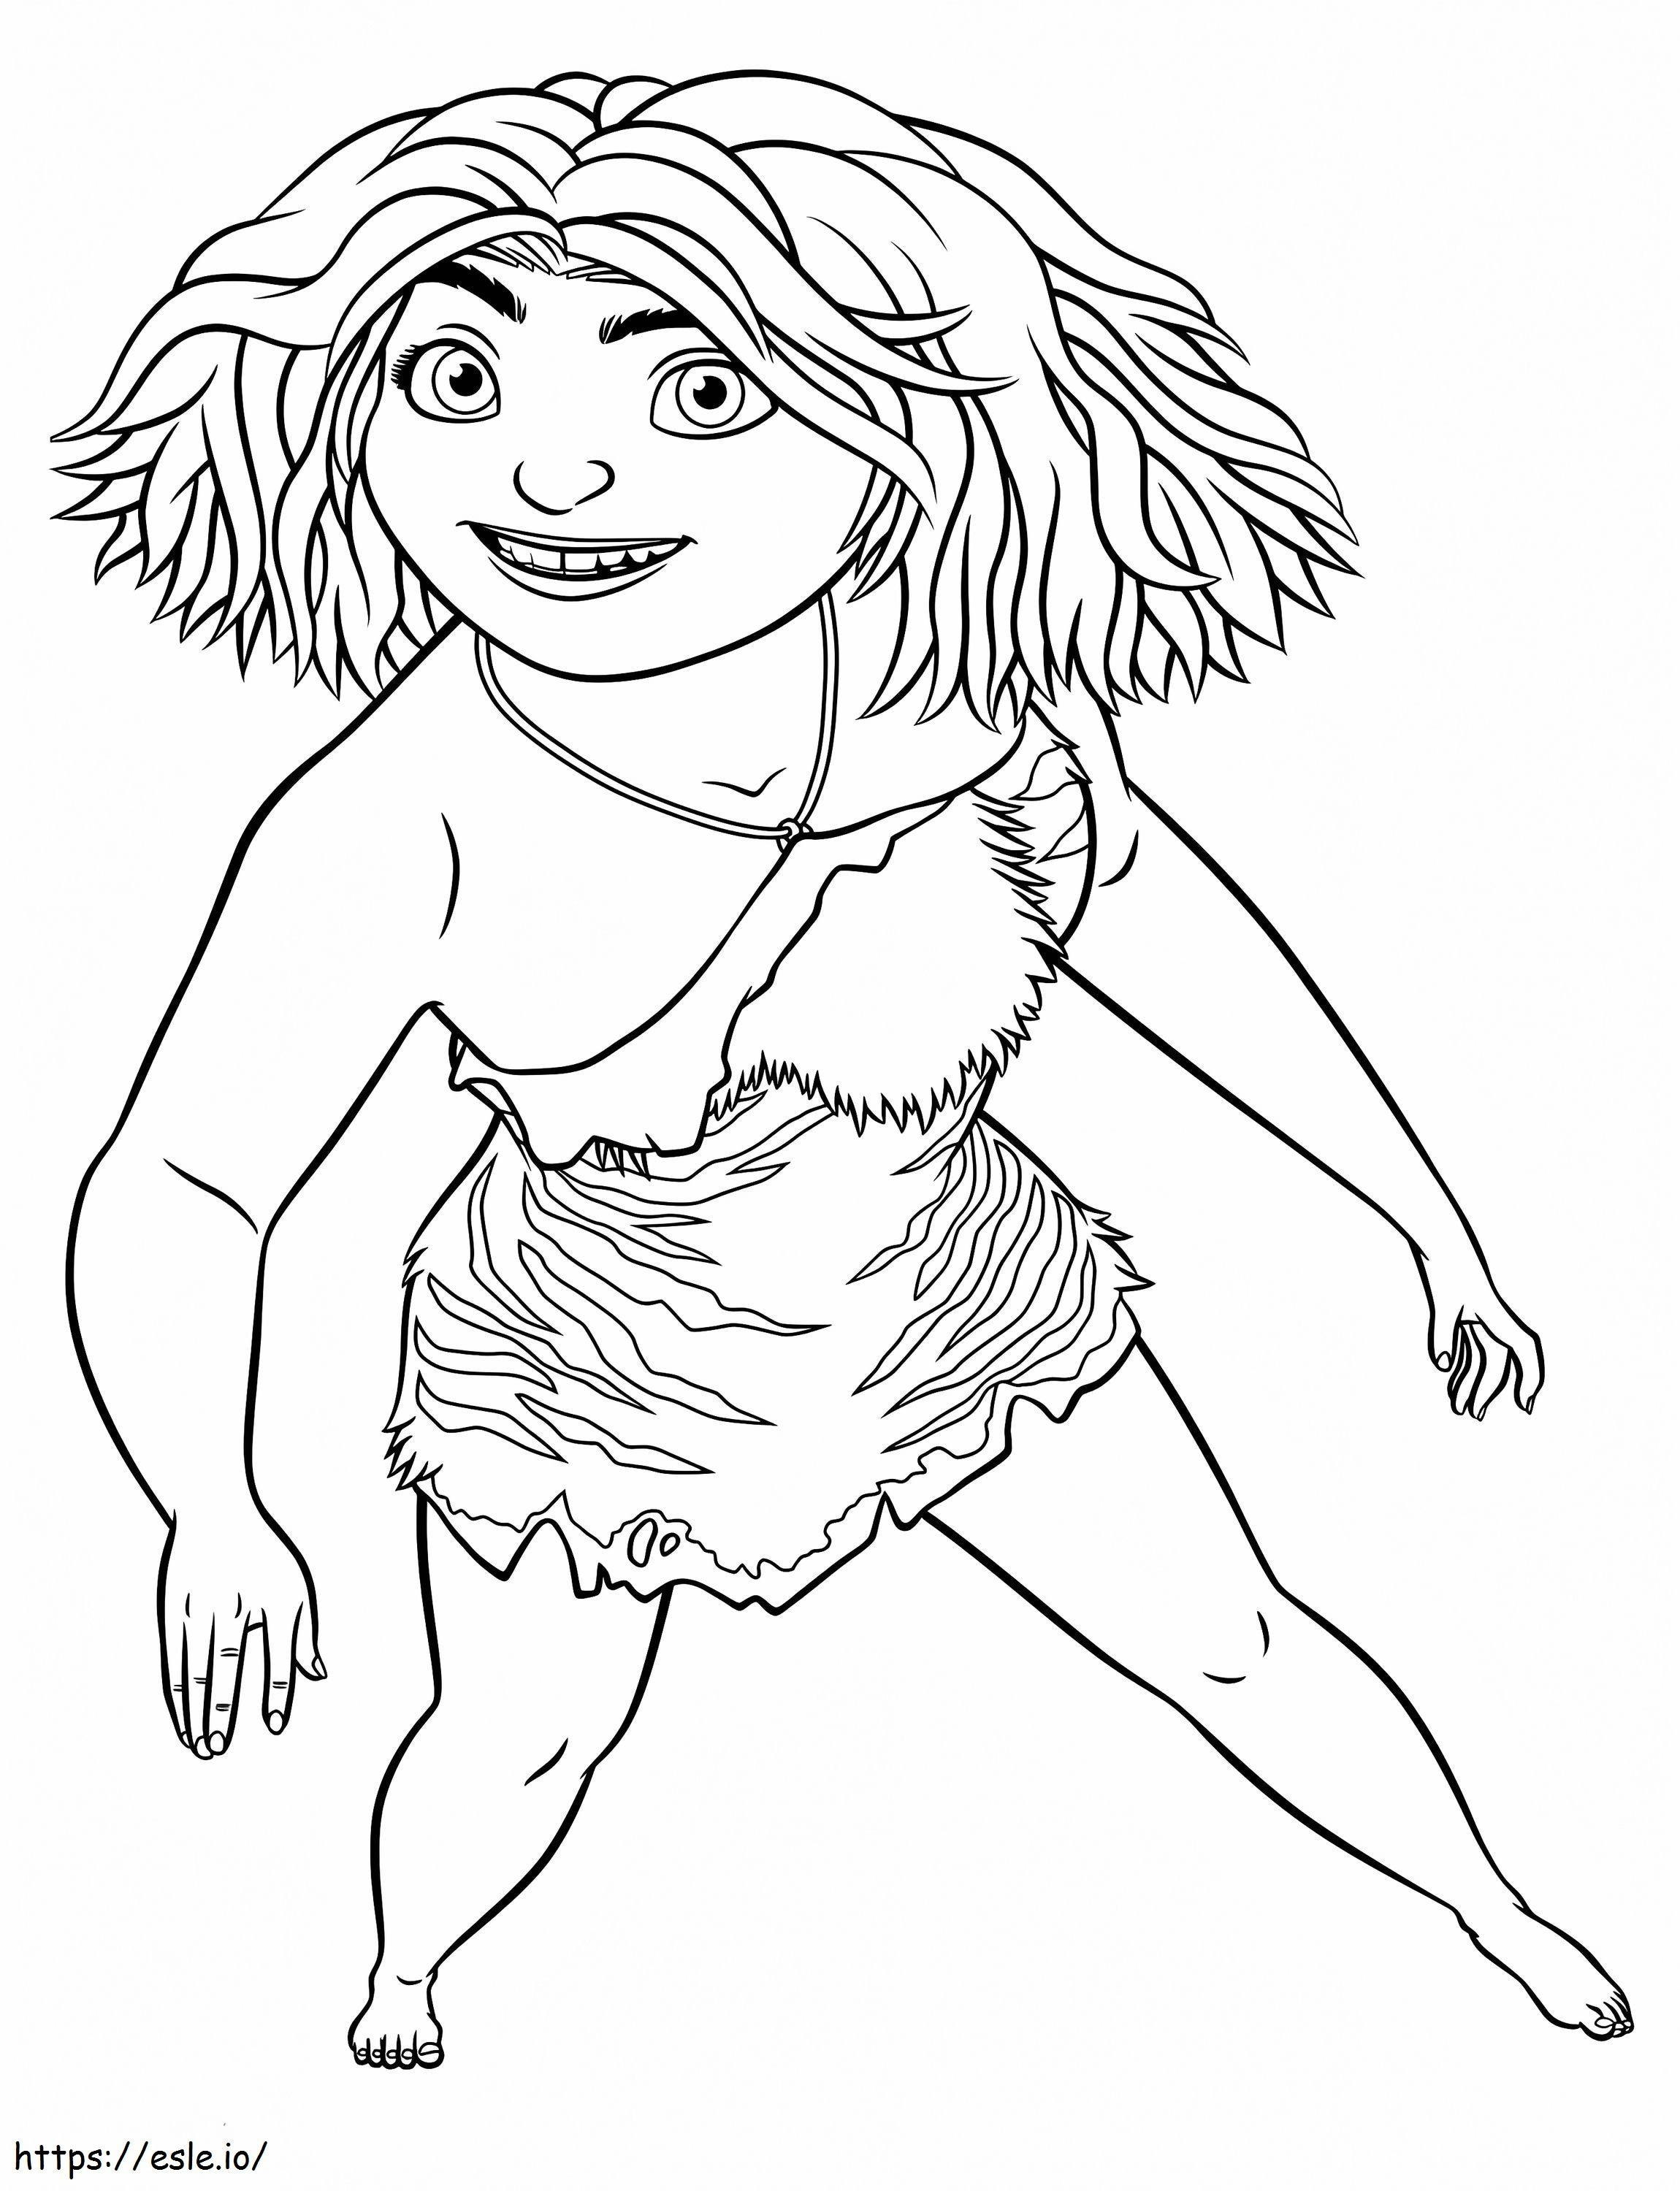 Epppp coloring page